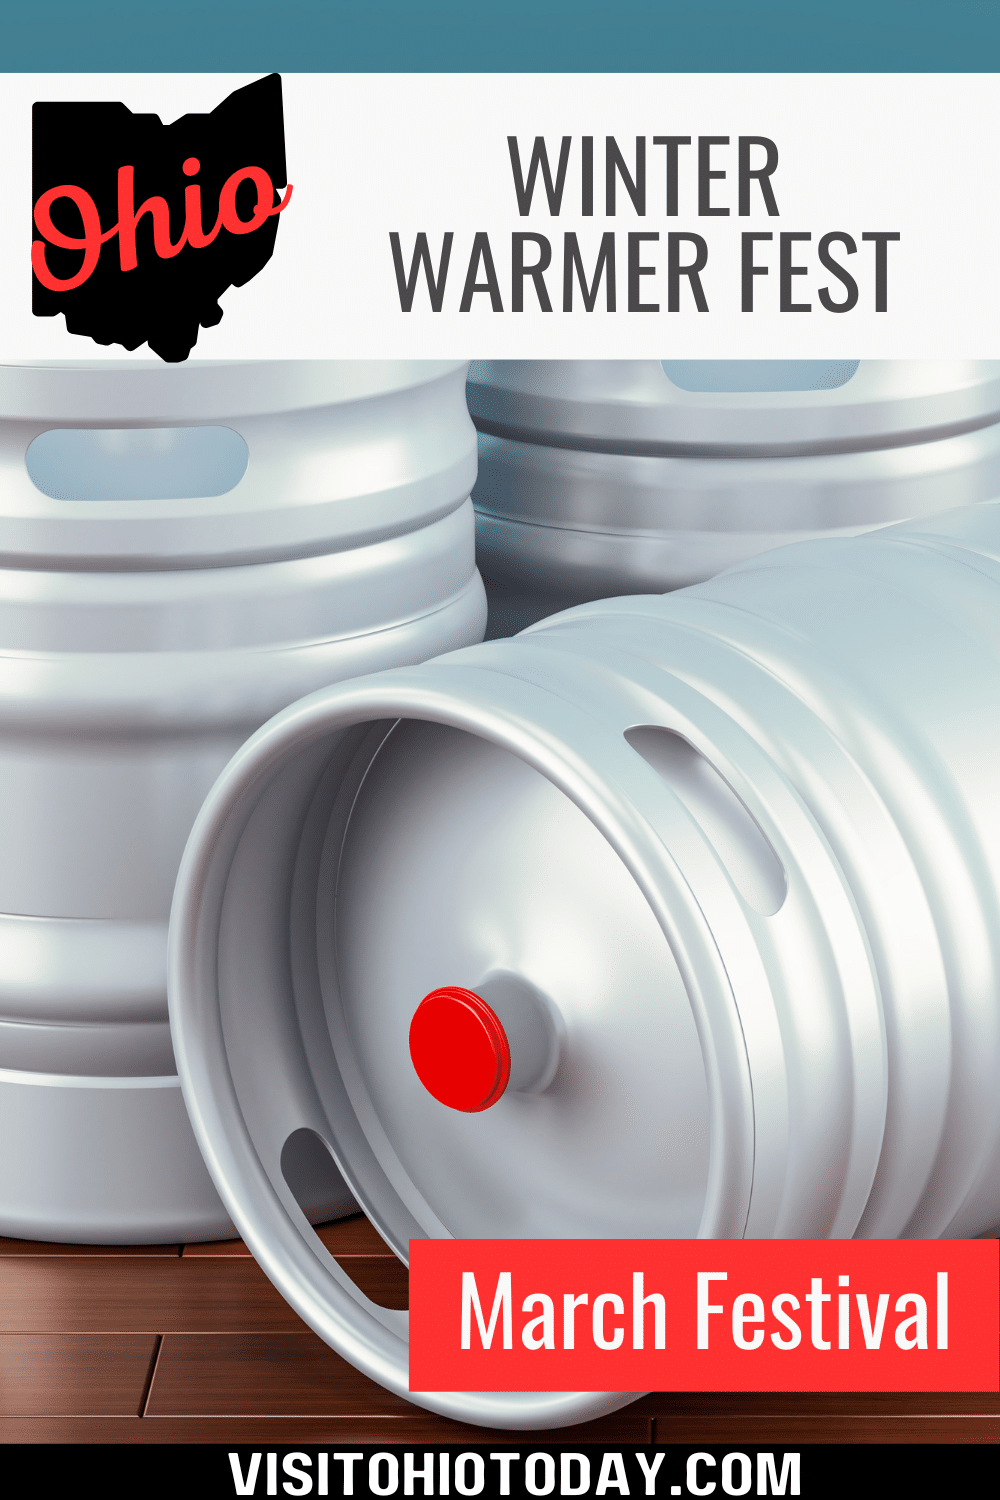 Winter Warmer Fest is an annual fundraiser for the Ohio Craft Brewers Association that takes place in early March at Windows on the River in Cleveland.